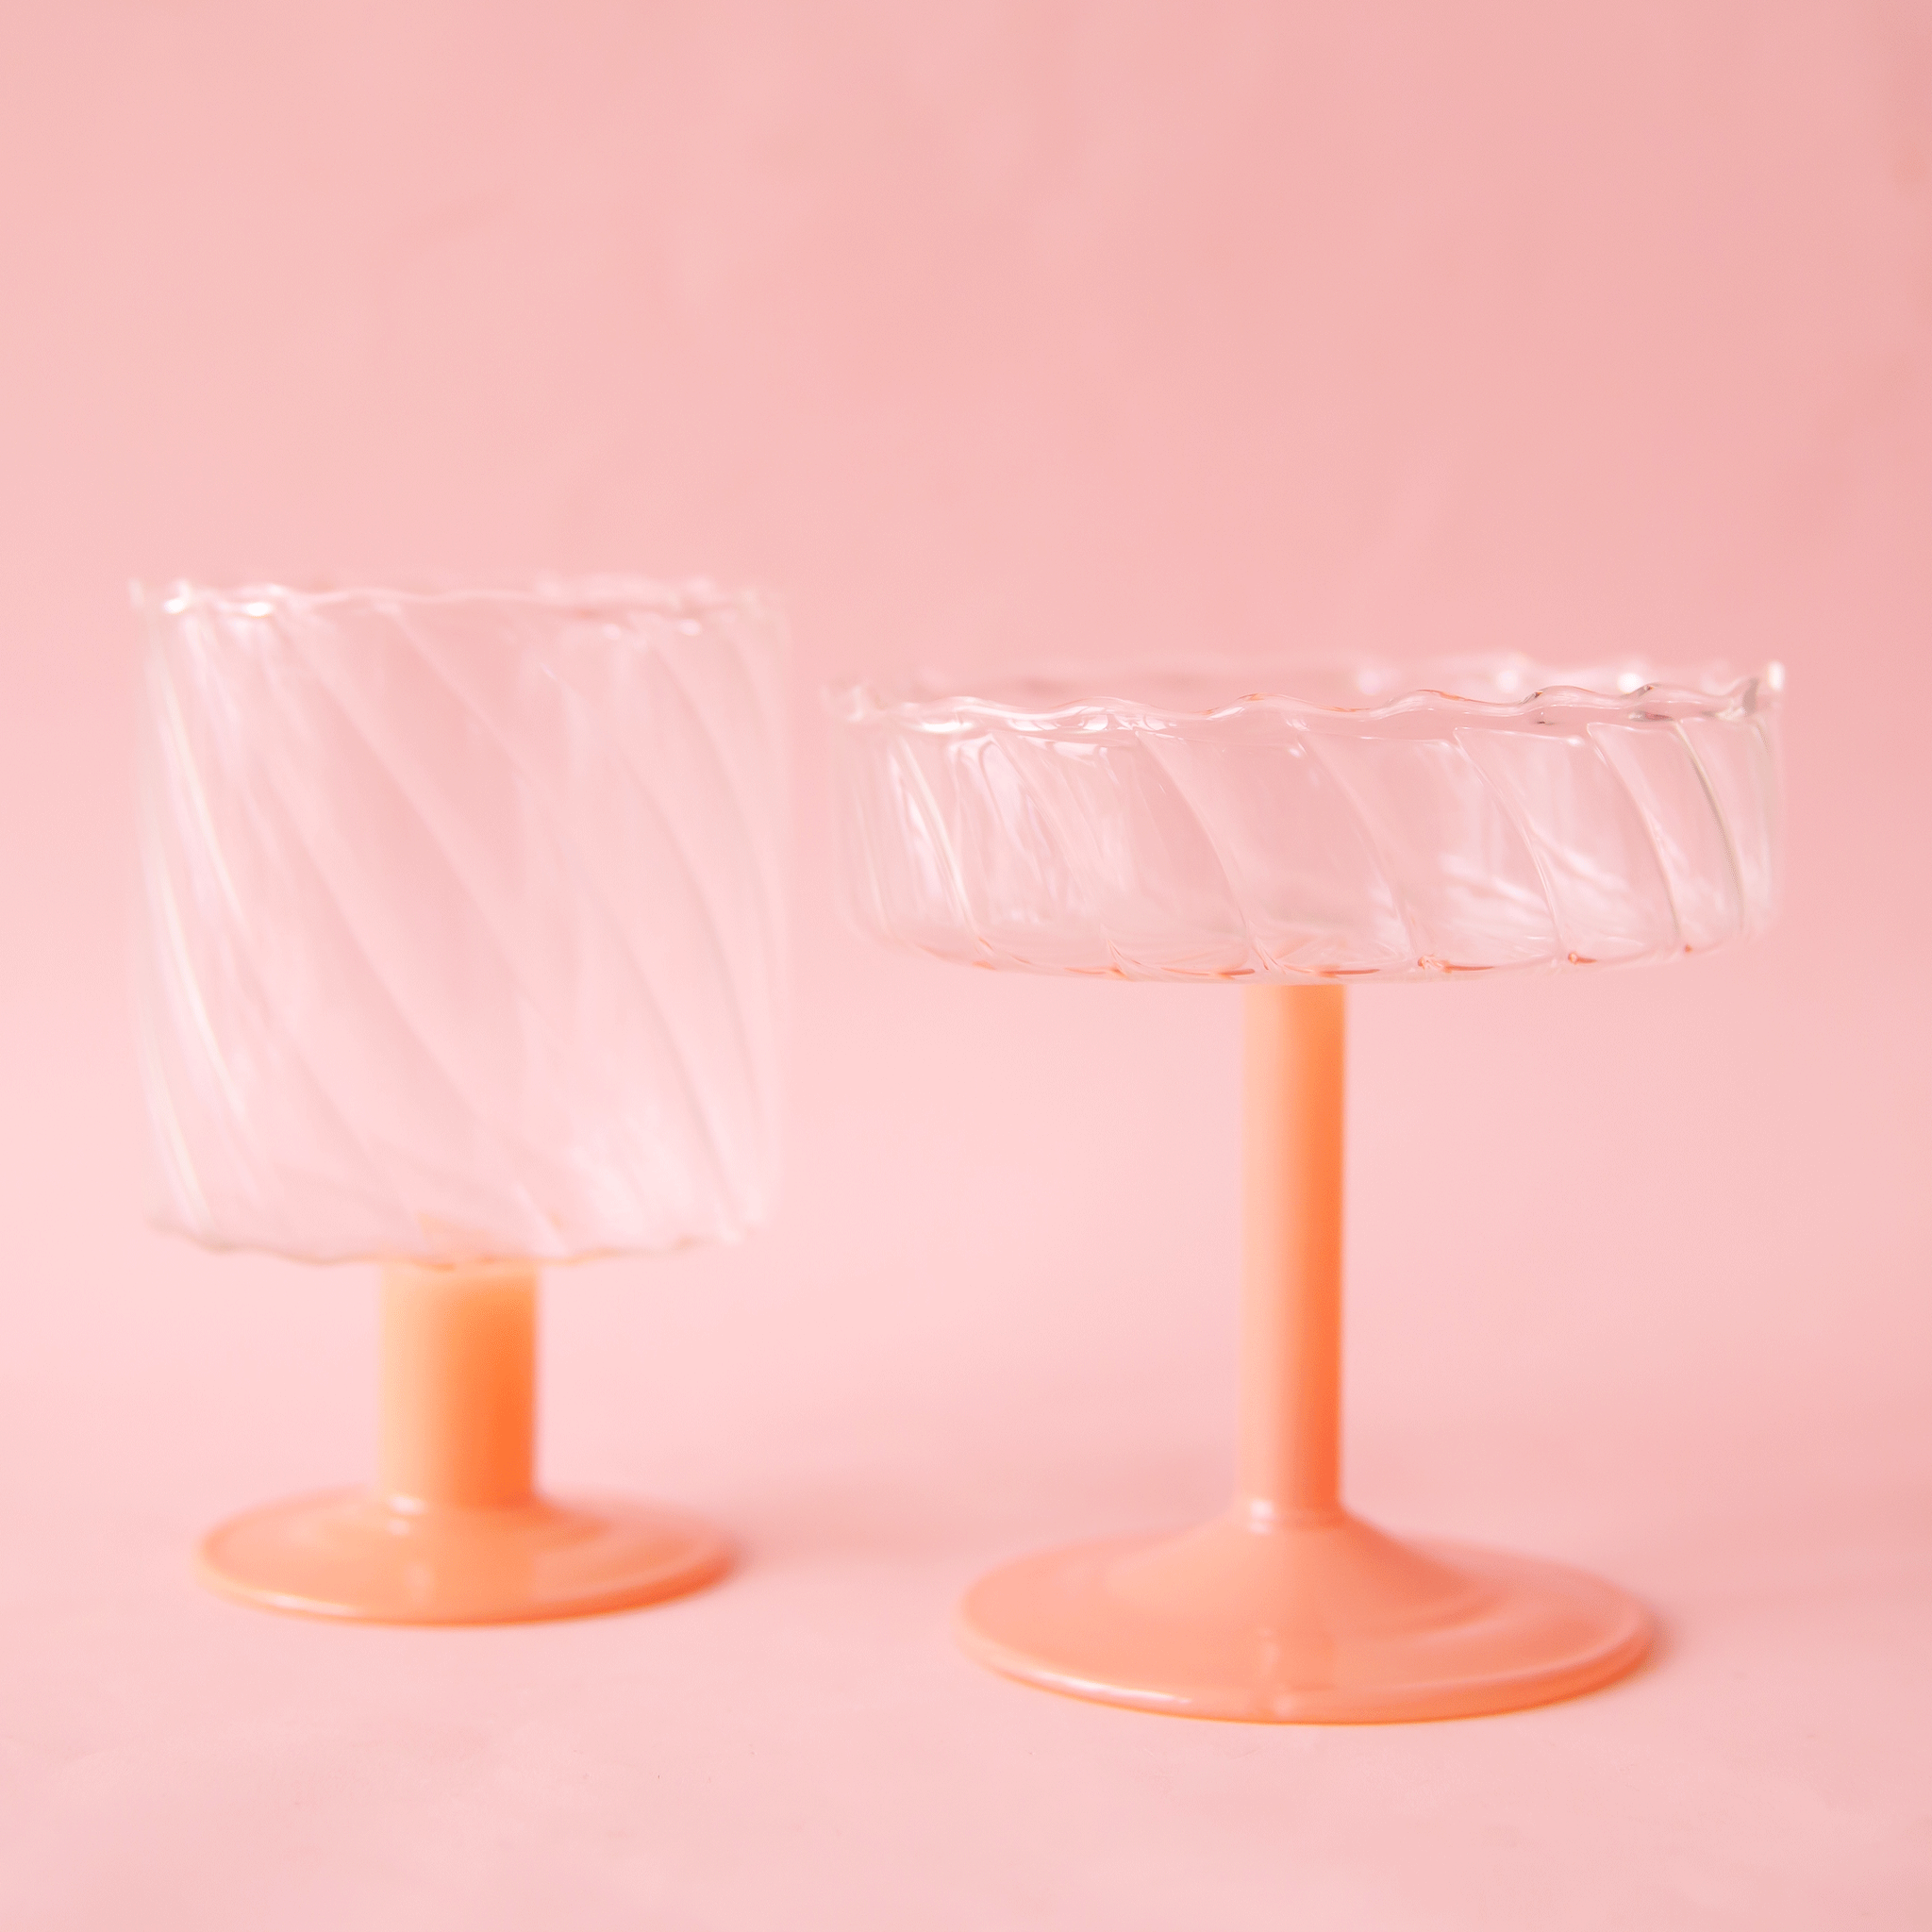 On a pink background is two wavy glass coupe with a pink stem. One glass is a coupe style, the other is a short wine glass style. 